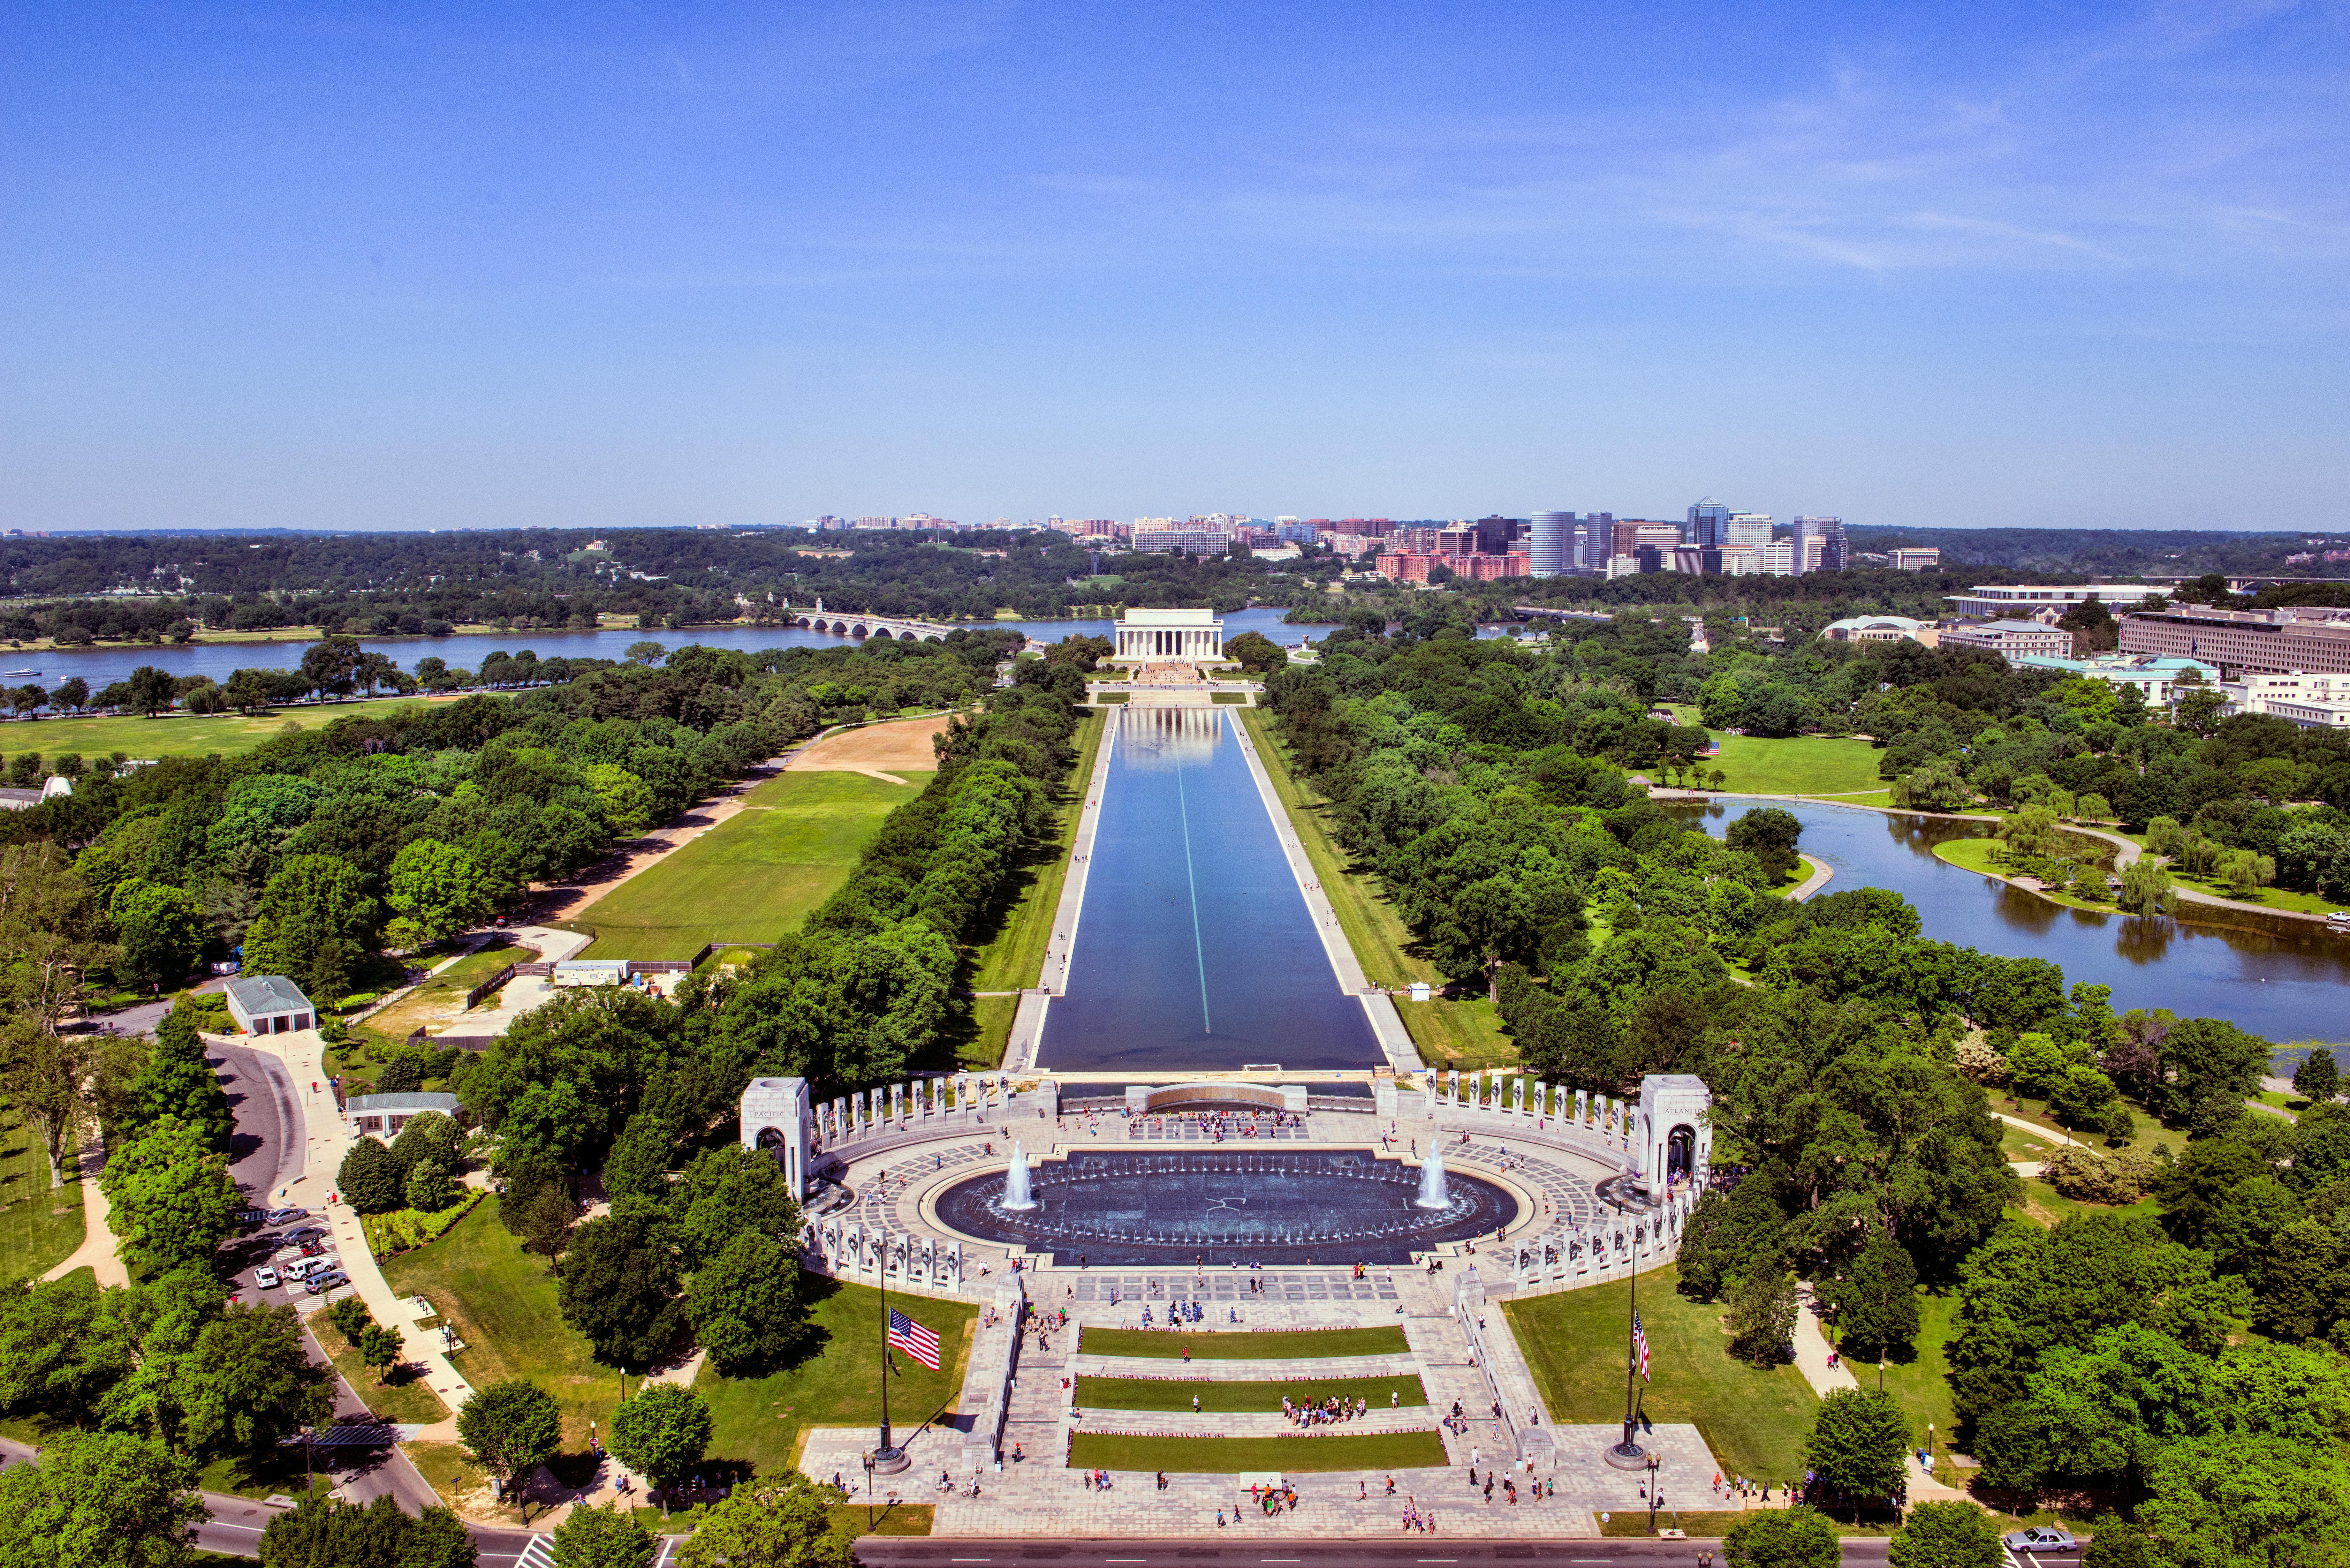 Aerial view of stone columns around an oval-shaped pool at the World War II Memorial.